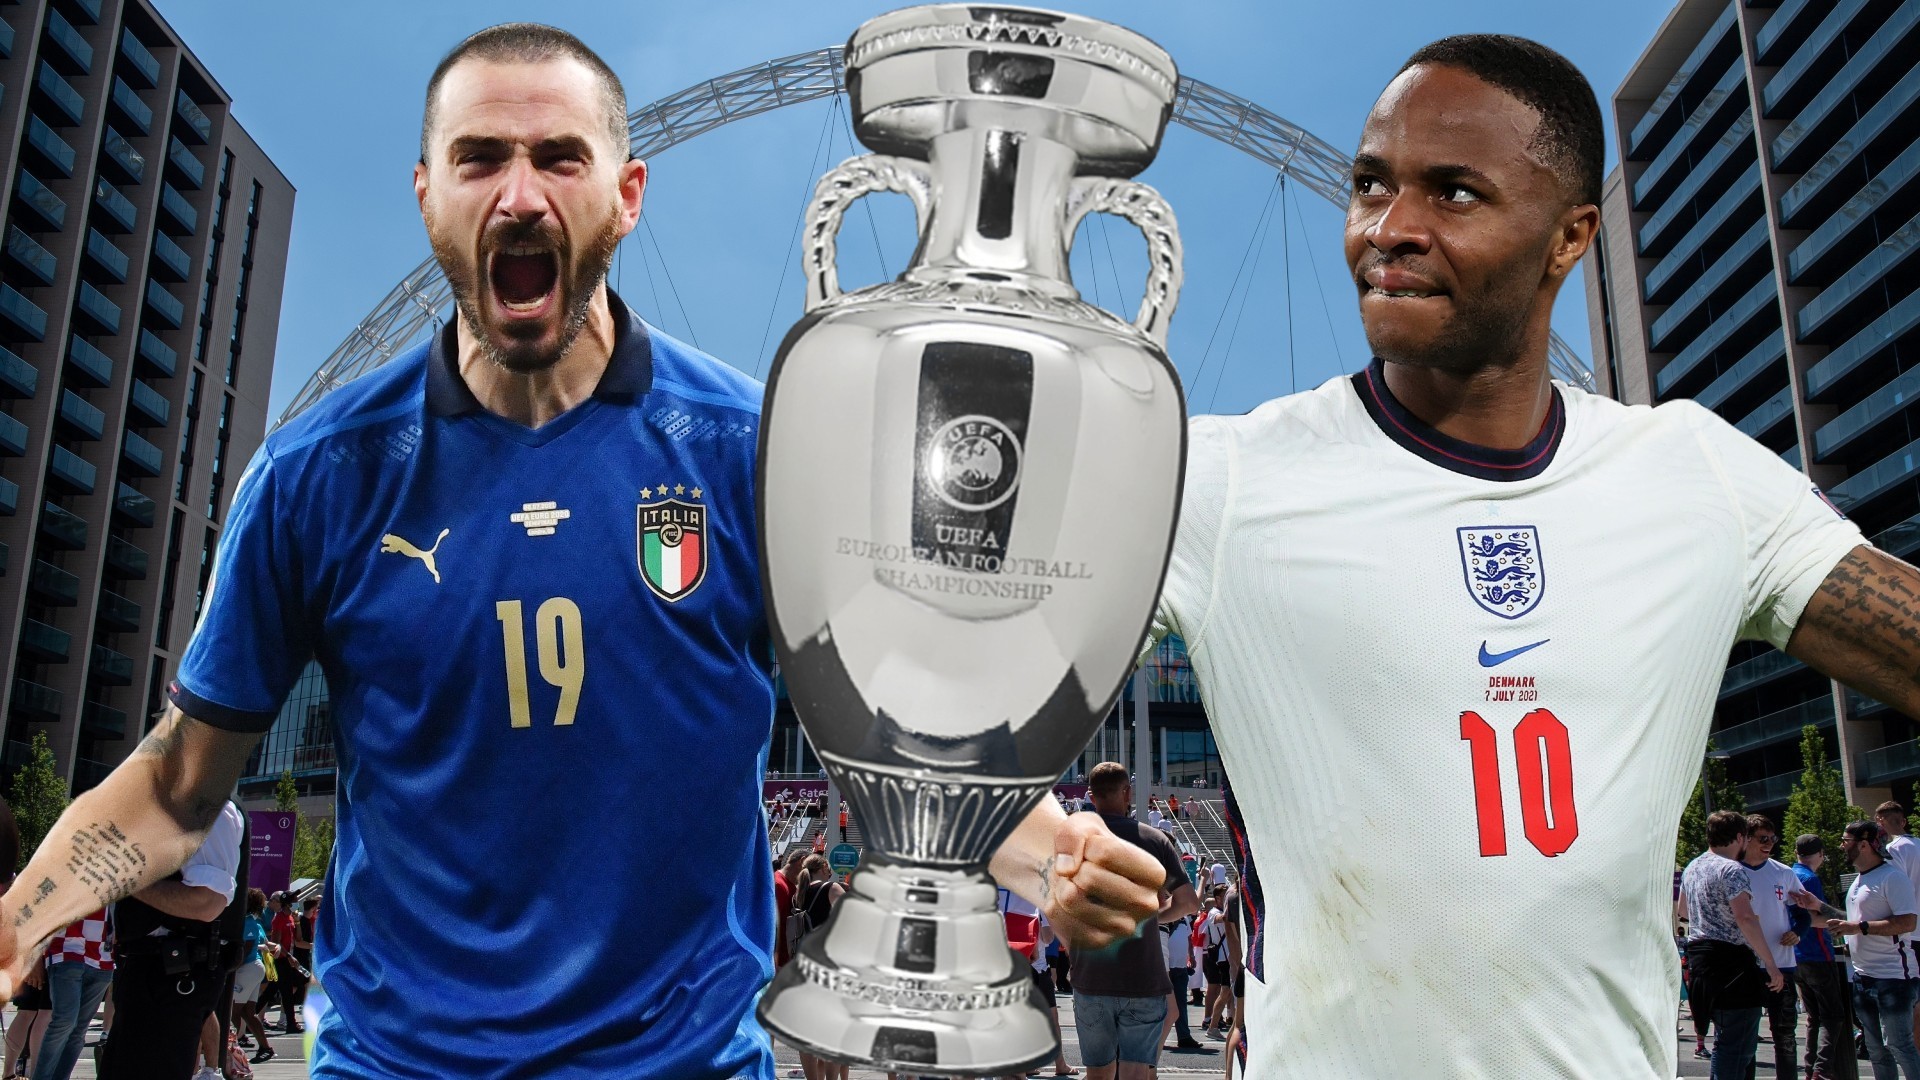 Italie - Angleterre : diffusion TV, live streaming, compos probables et avant-match